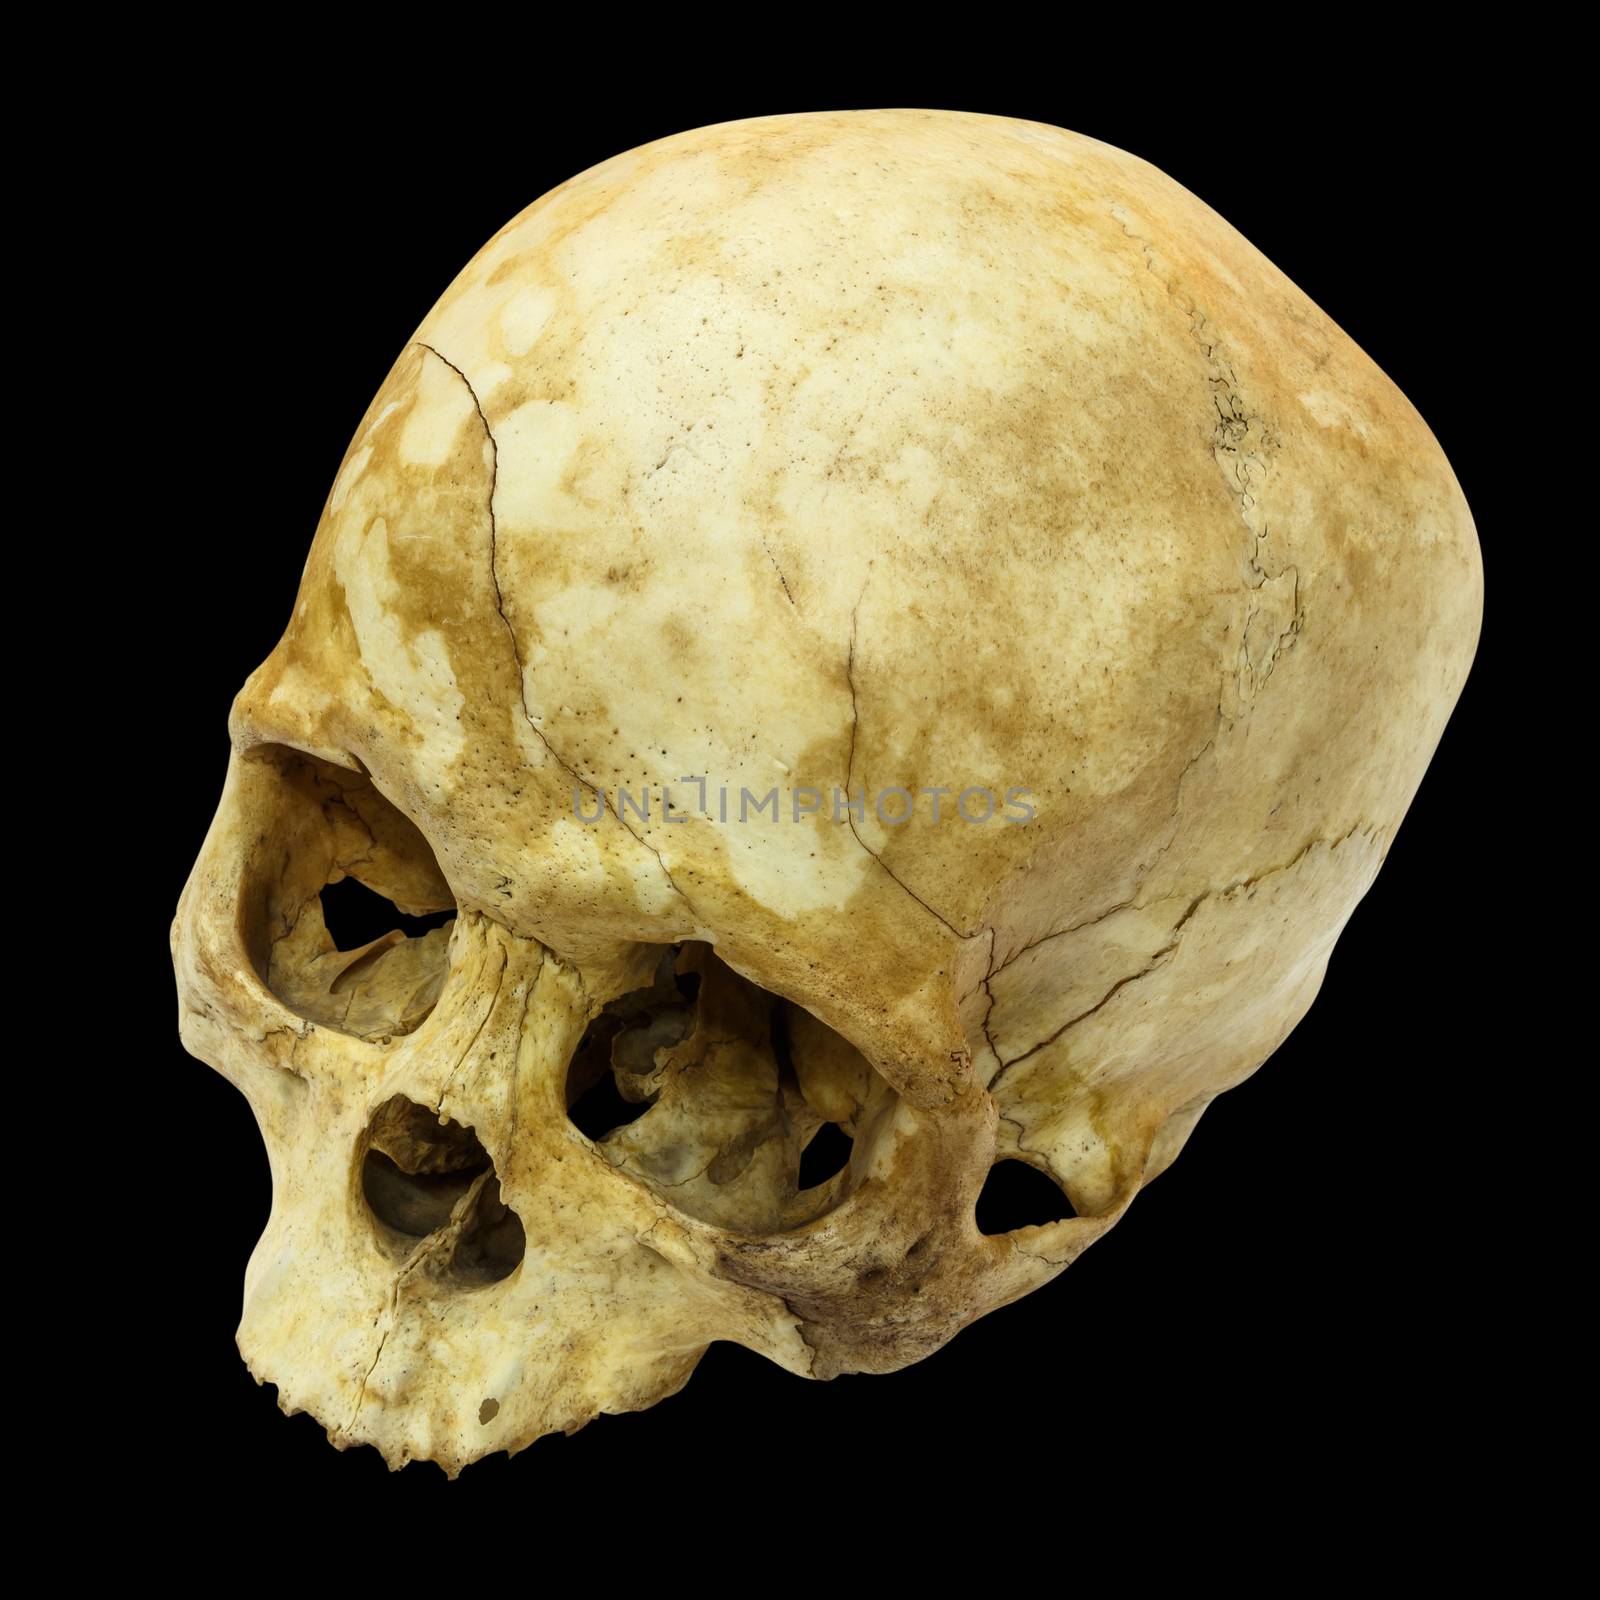 Human Skull Fracture(top side,apex)(Mongoloid,Asian) on isolated by stockdevil